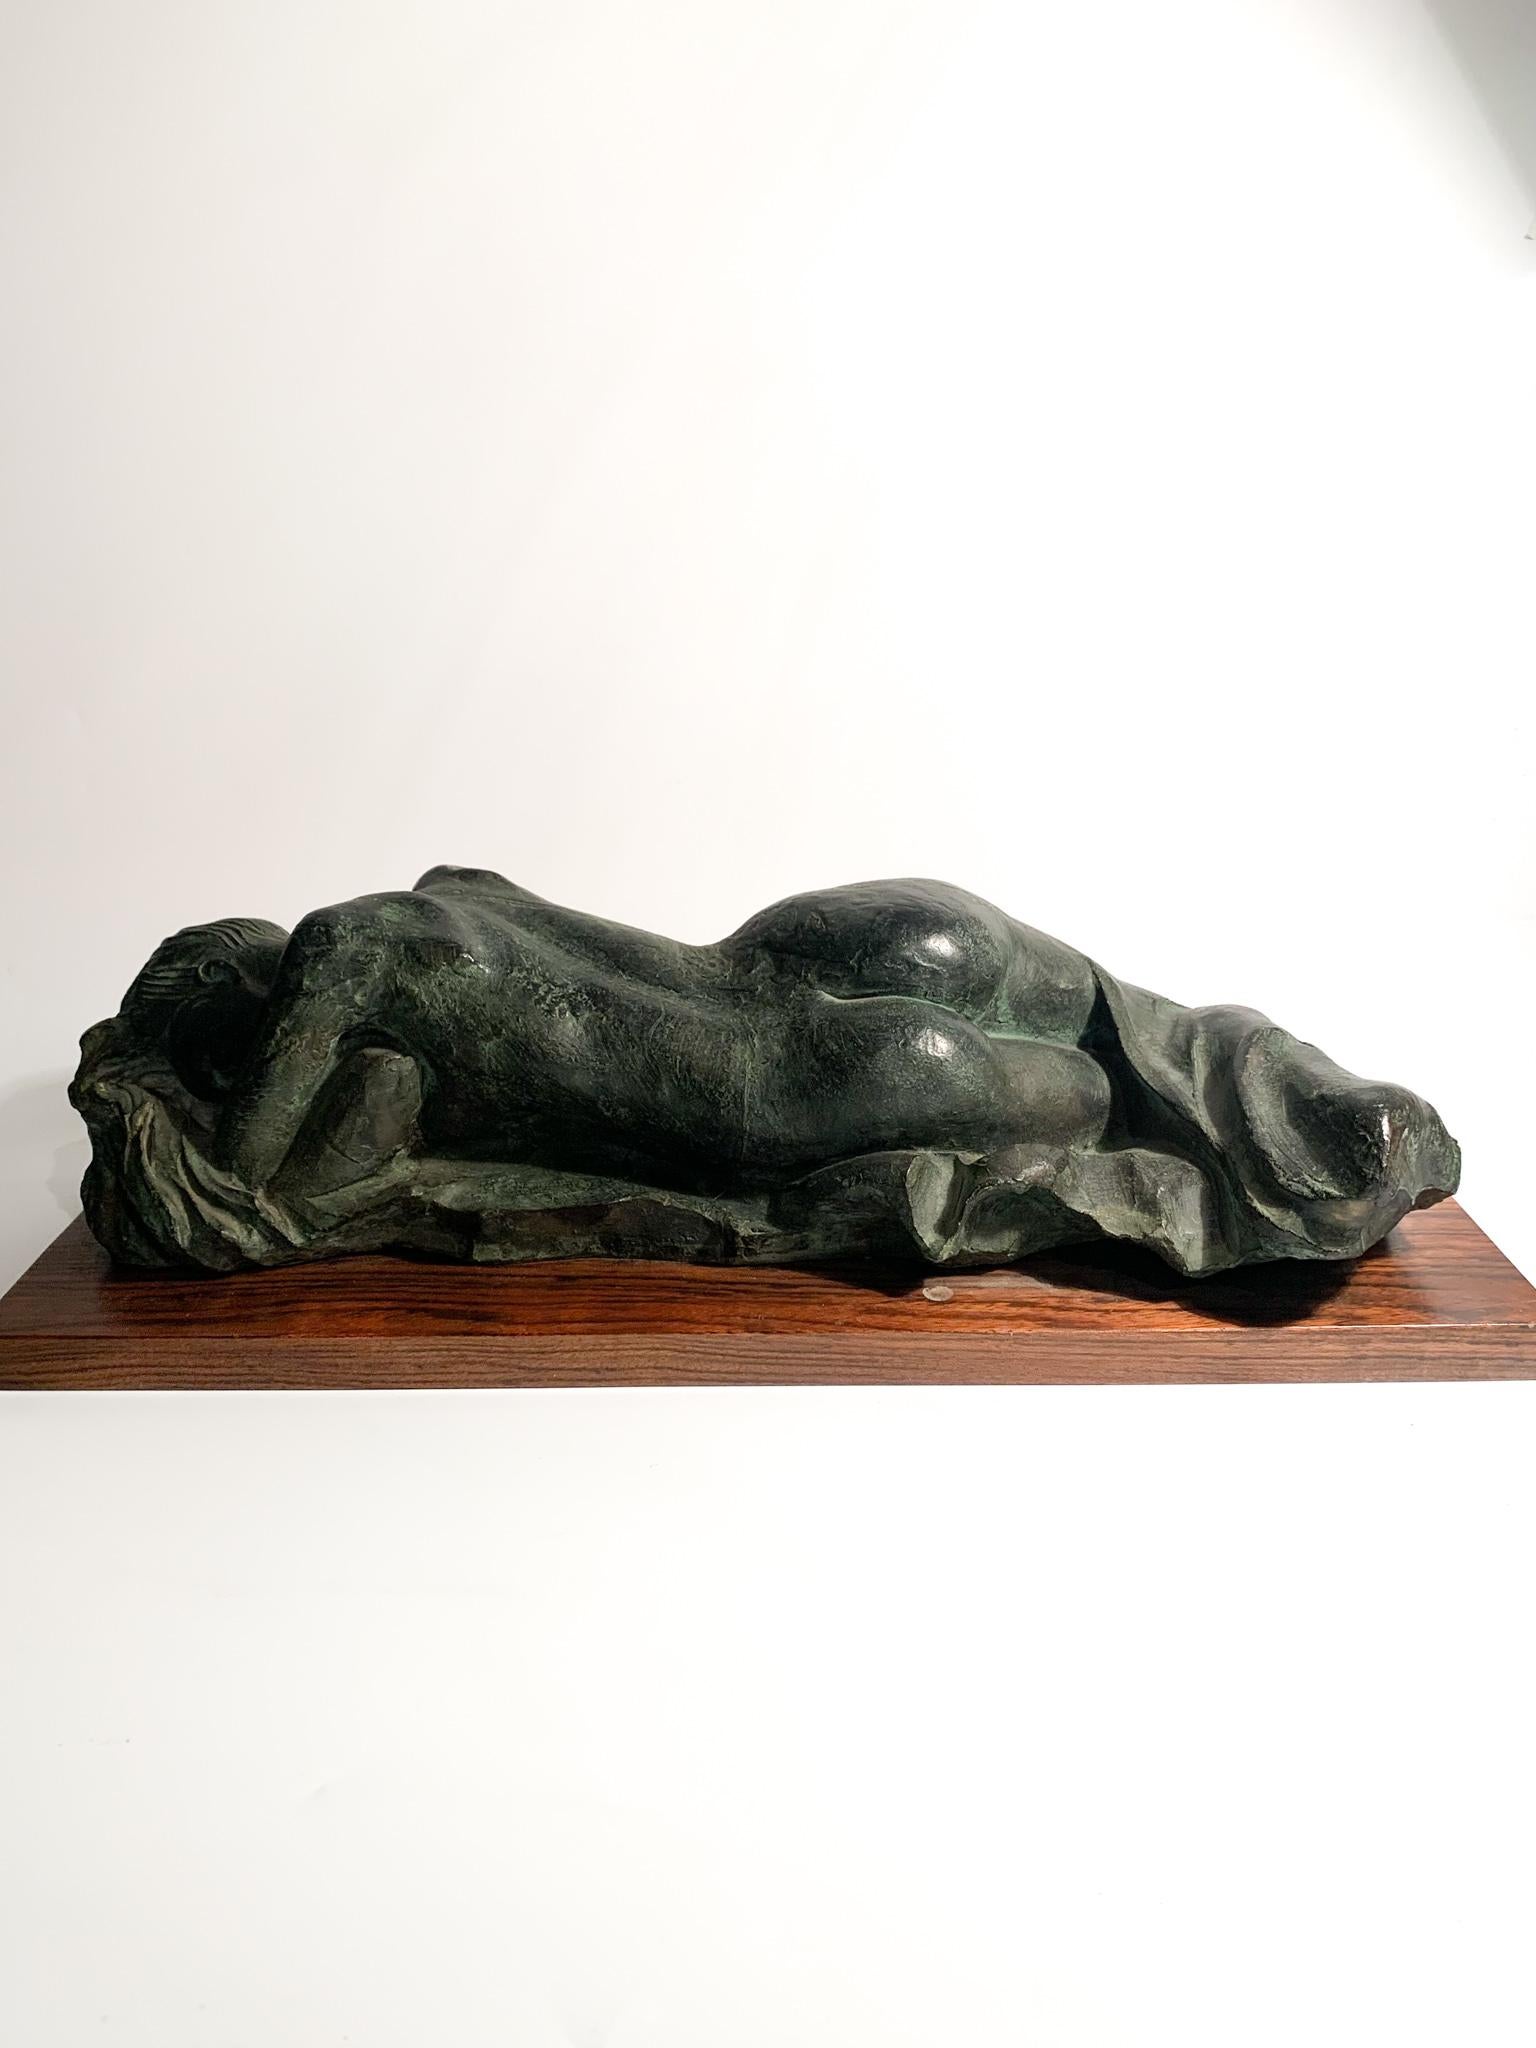 Sculpture of a reclining female nude in bronze and wooden base, created by Michele Zappino in the 1990s

Ø 49 cm Ø 20 cm h 14 cm